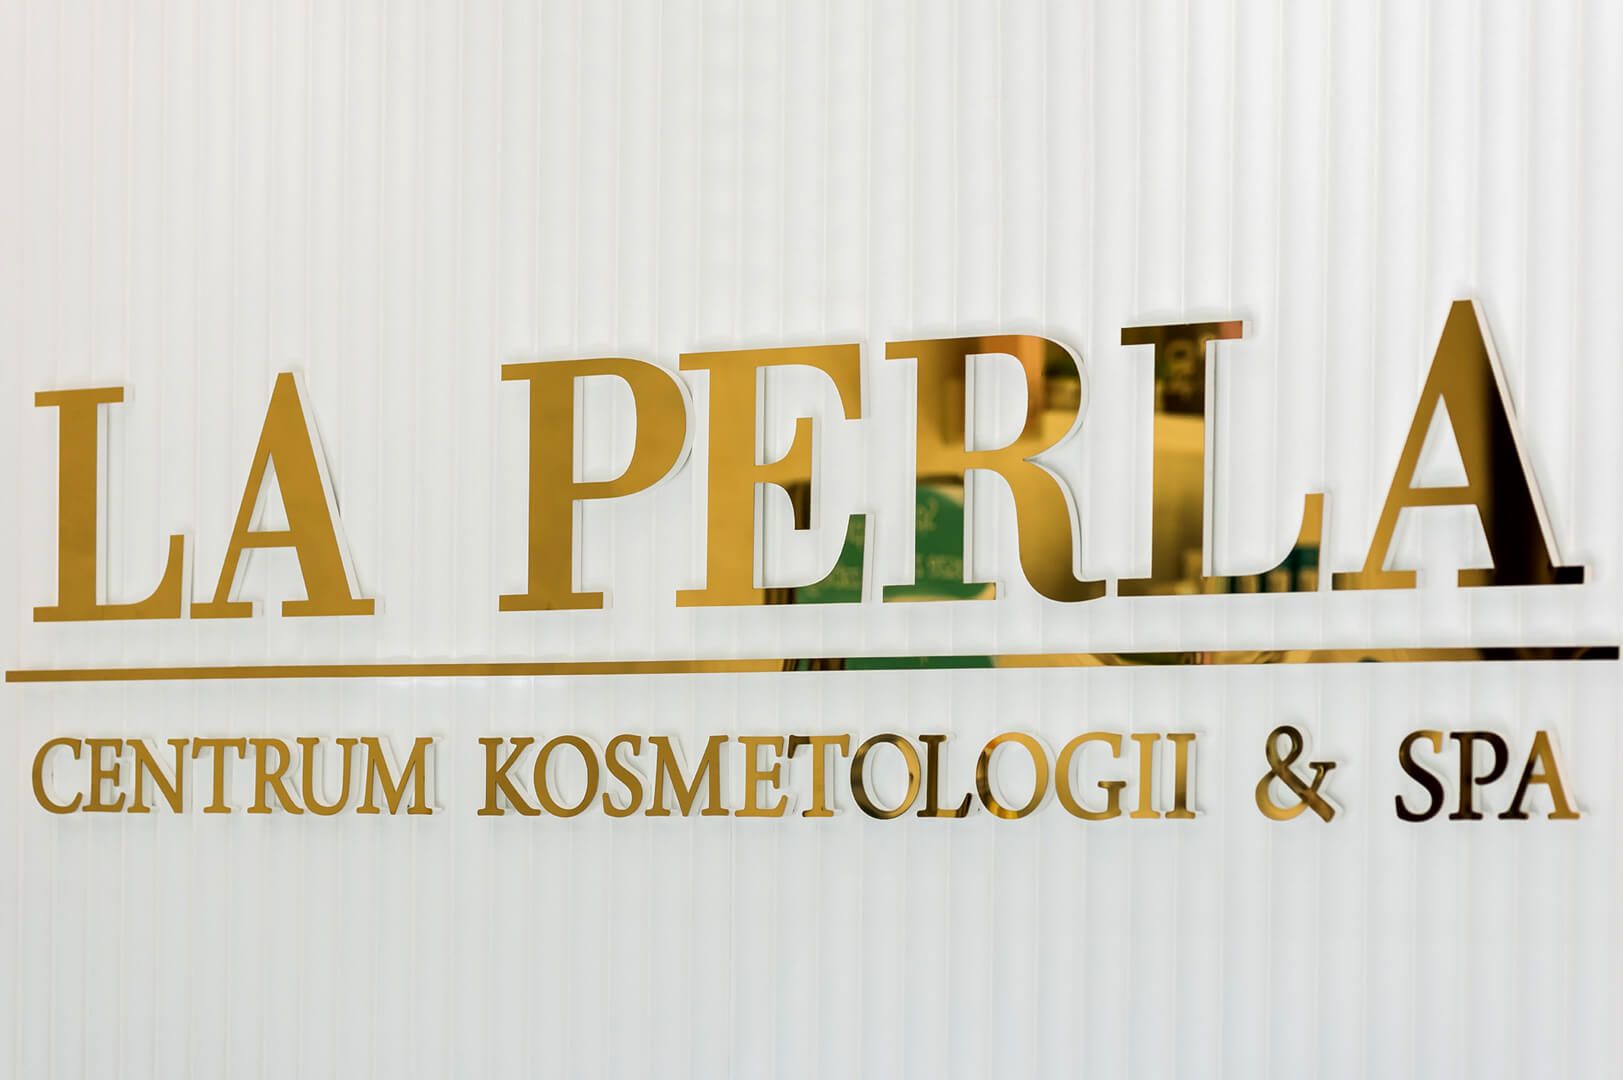 LA PERLA - 3D spatial letters in gold for cosmetology and spa center